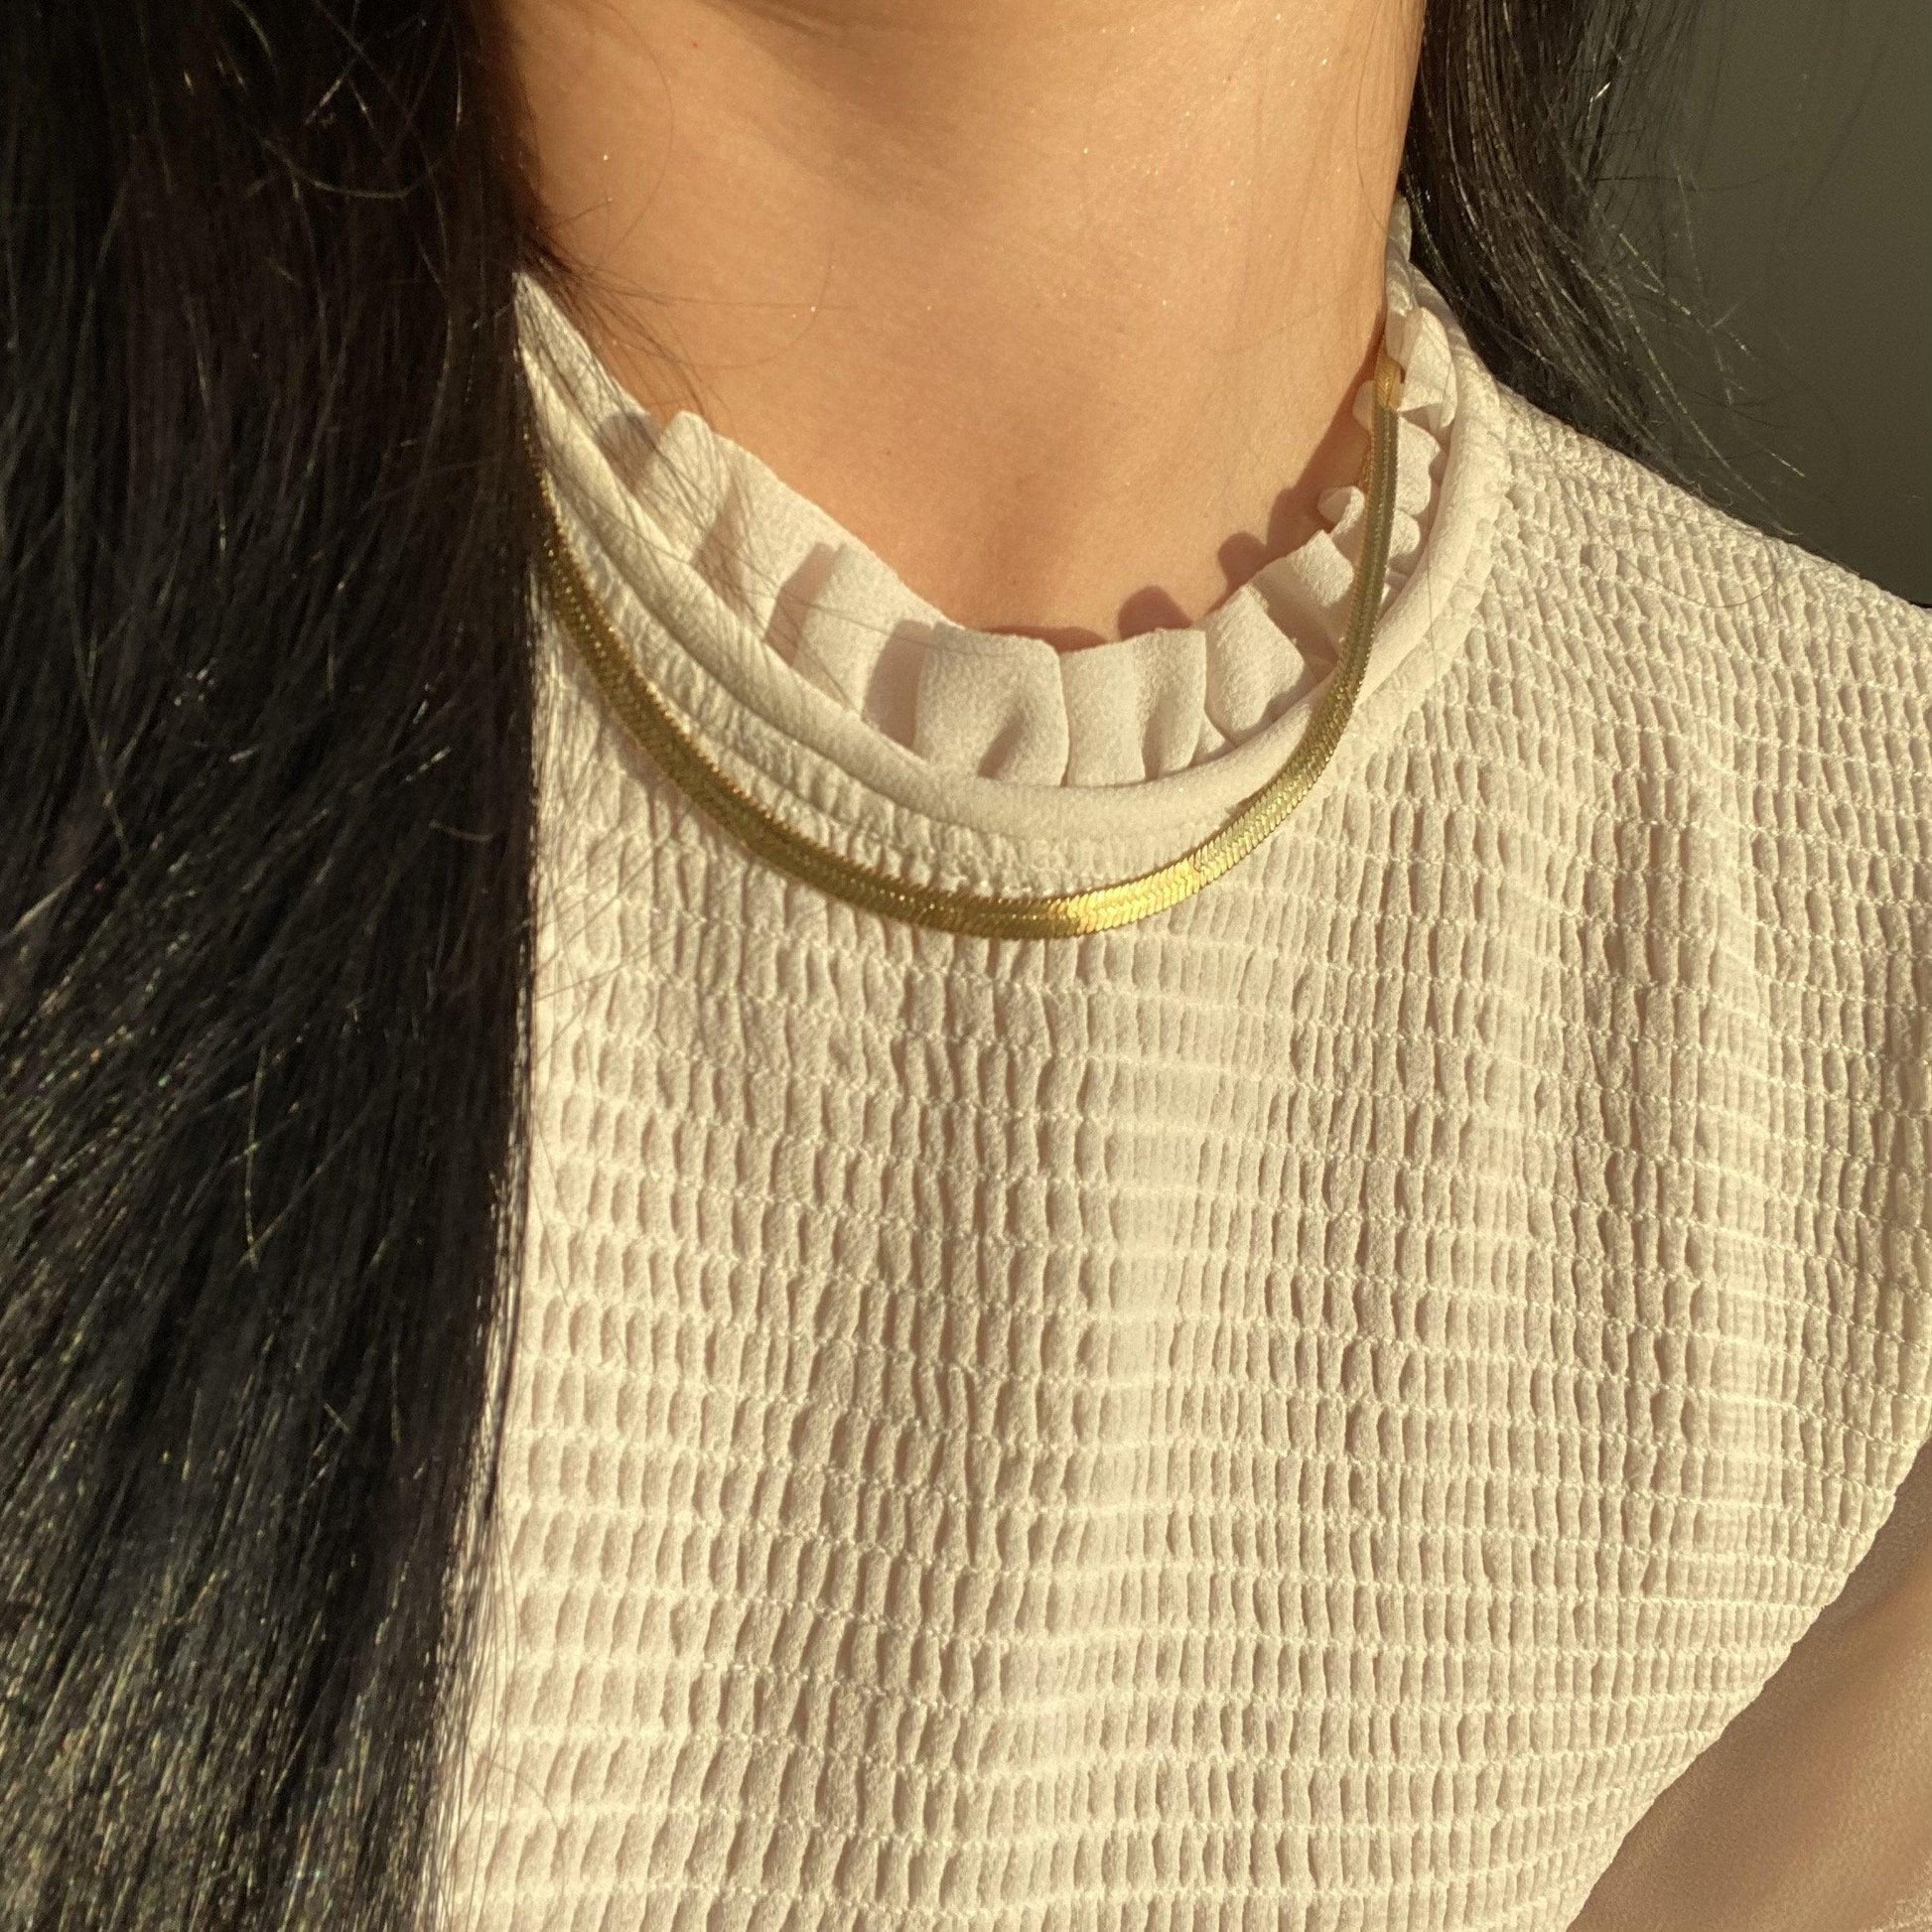 Classic Herringbone Necklace - Silver, Rose Gold or 18k Gold - The Smart Minimalist